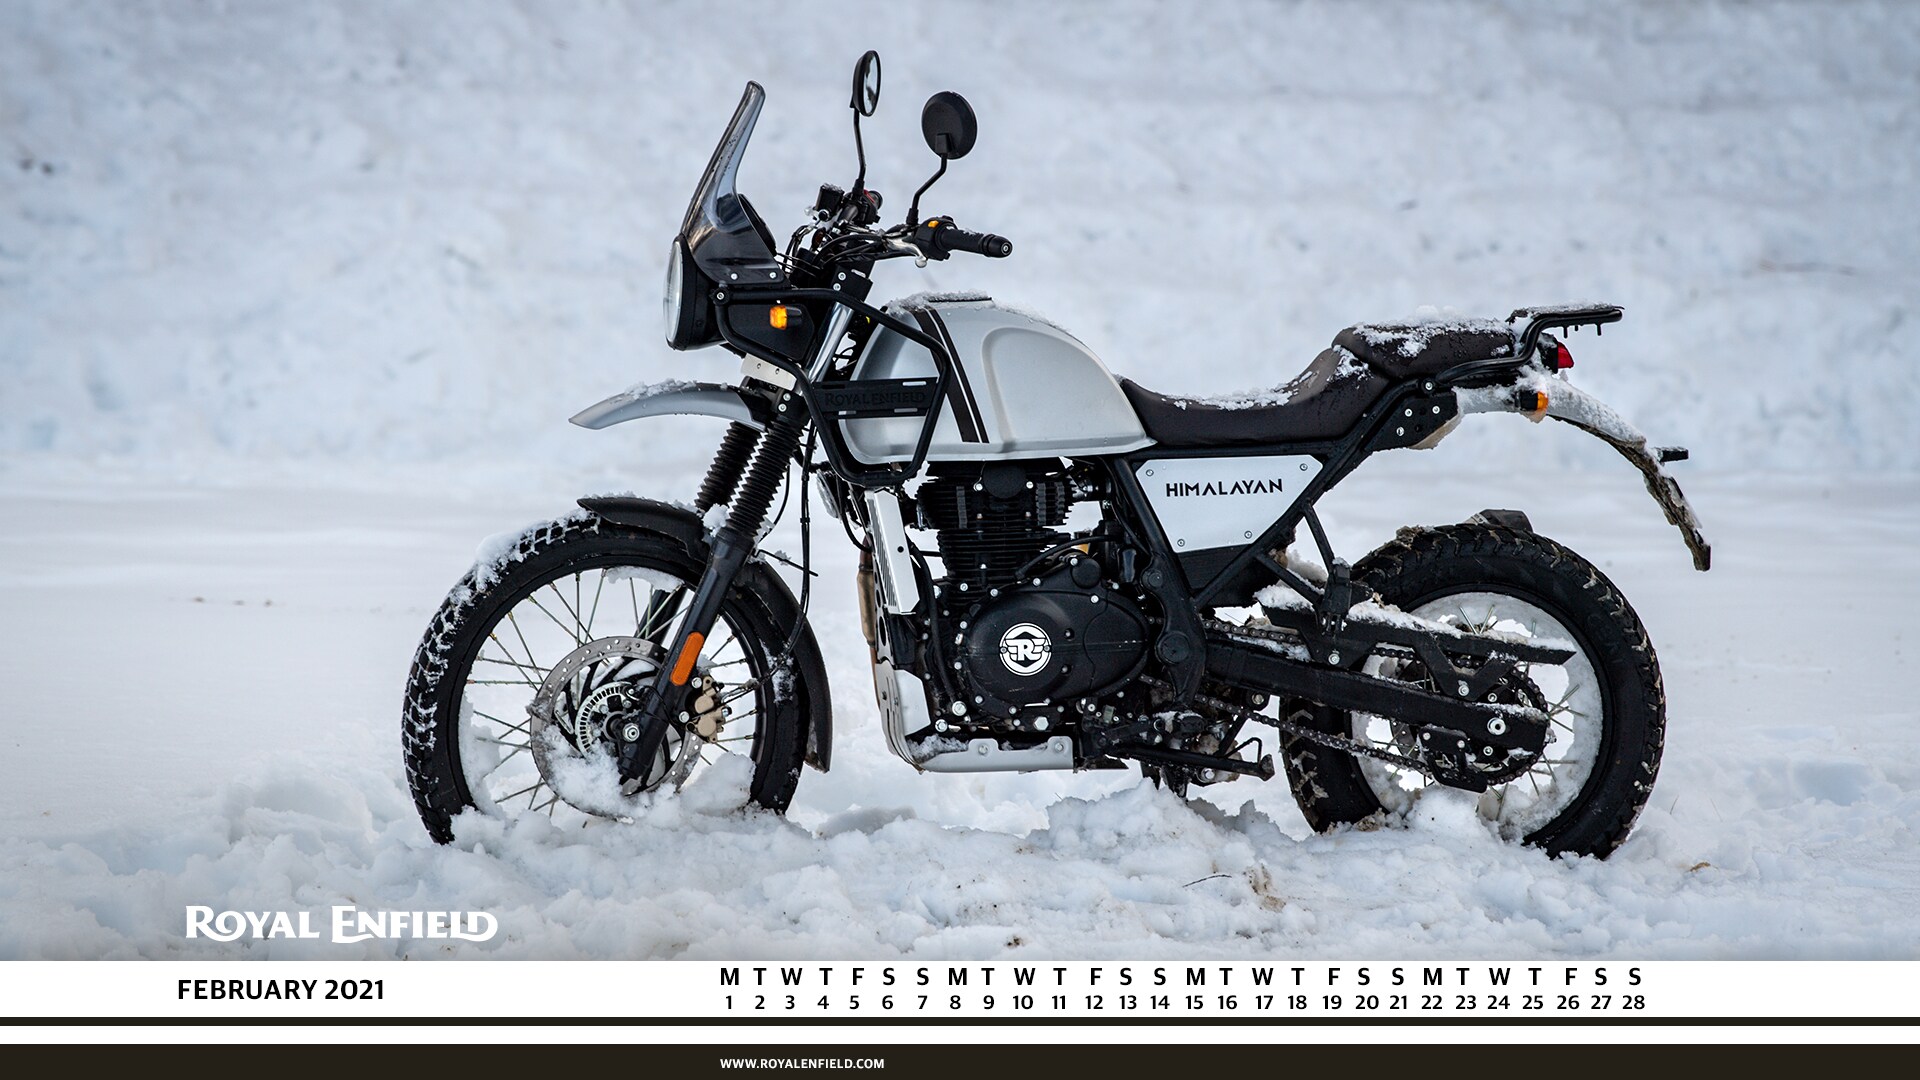 It's tough to beat the price of the Himalayan.